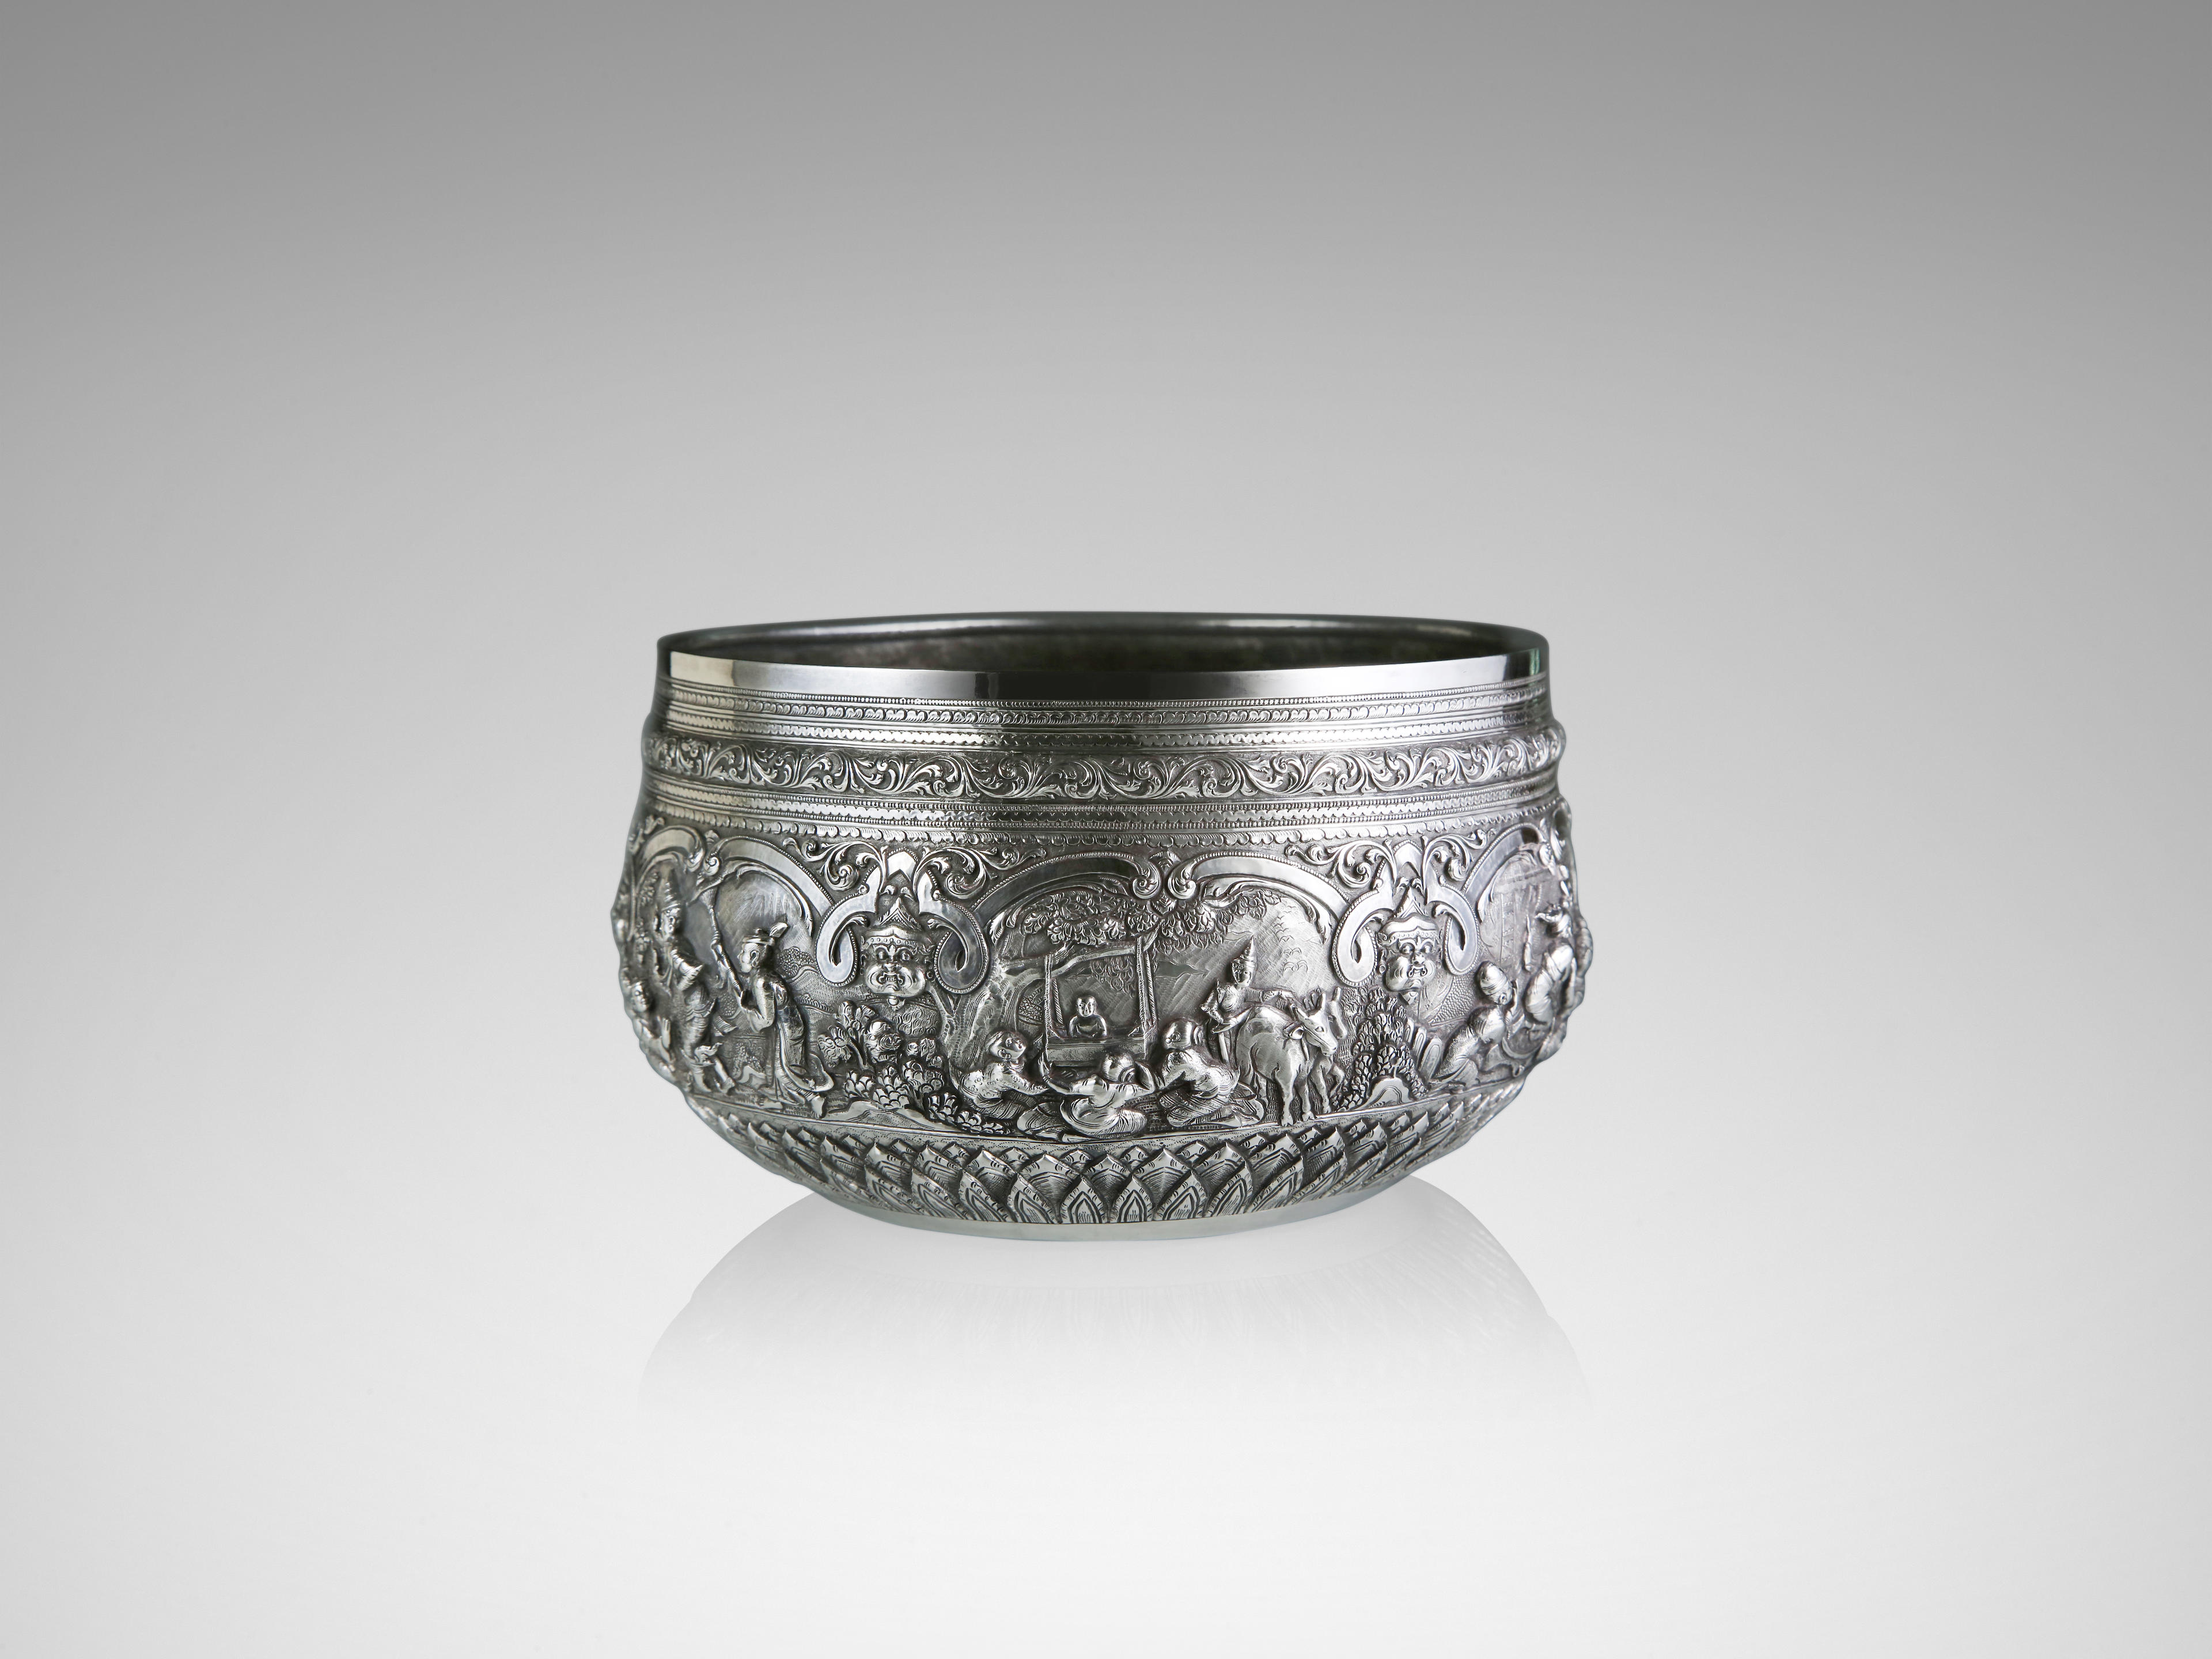 A SILVER OFFERING BOWL ATTRIBUTED TO MAUNG YIN MAUNG LOWER BURMA (MYANMAR), CIRCA 1905